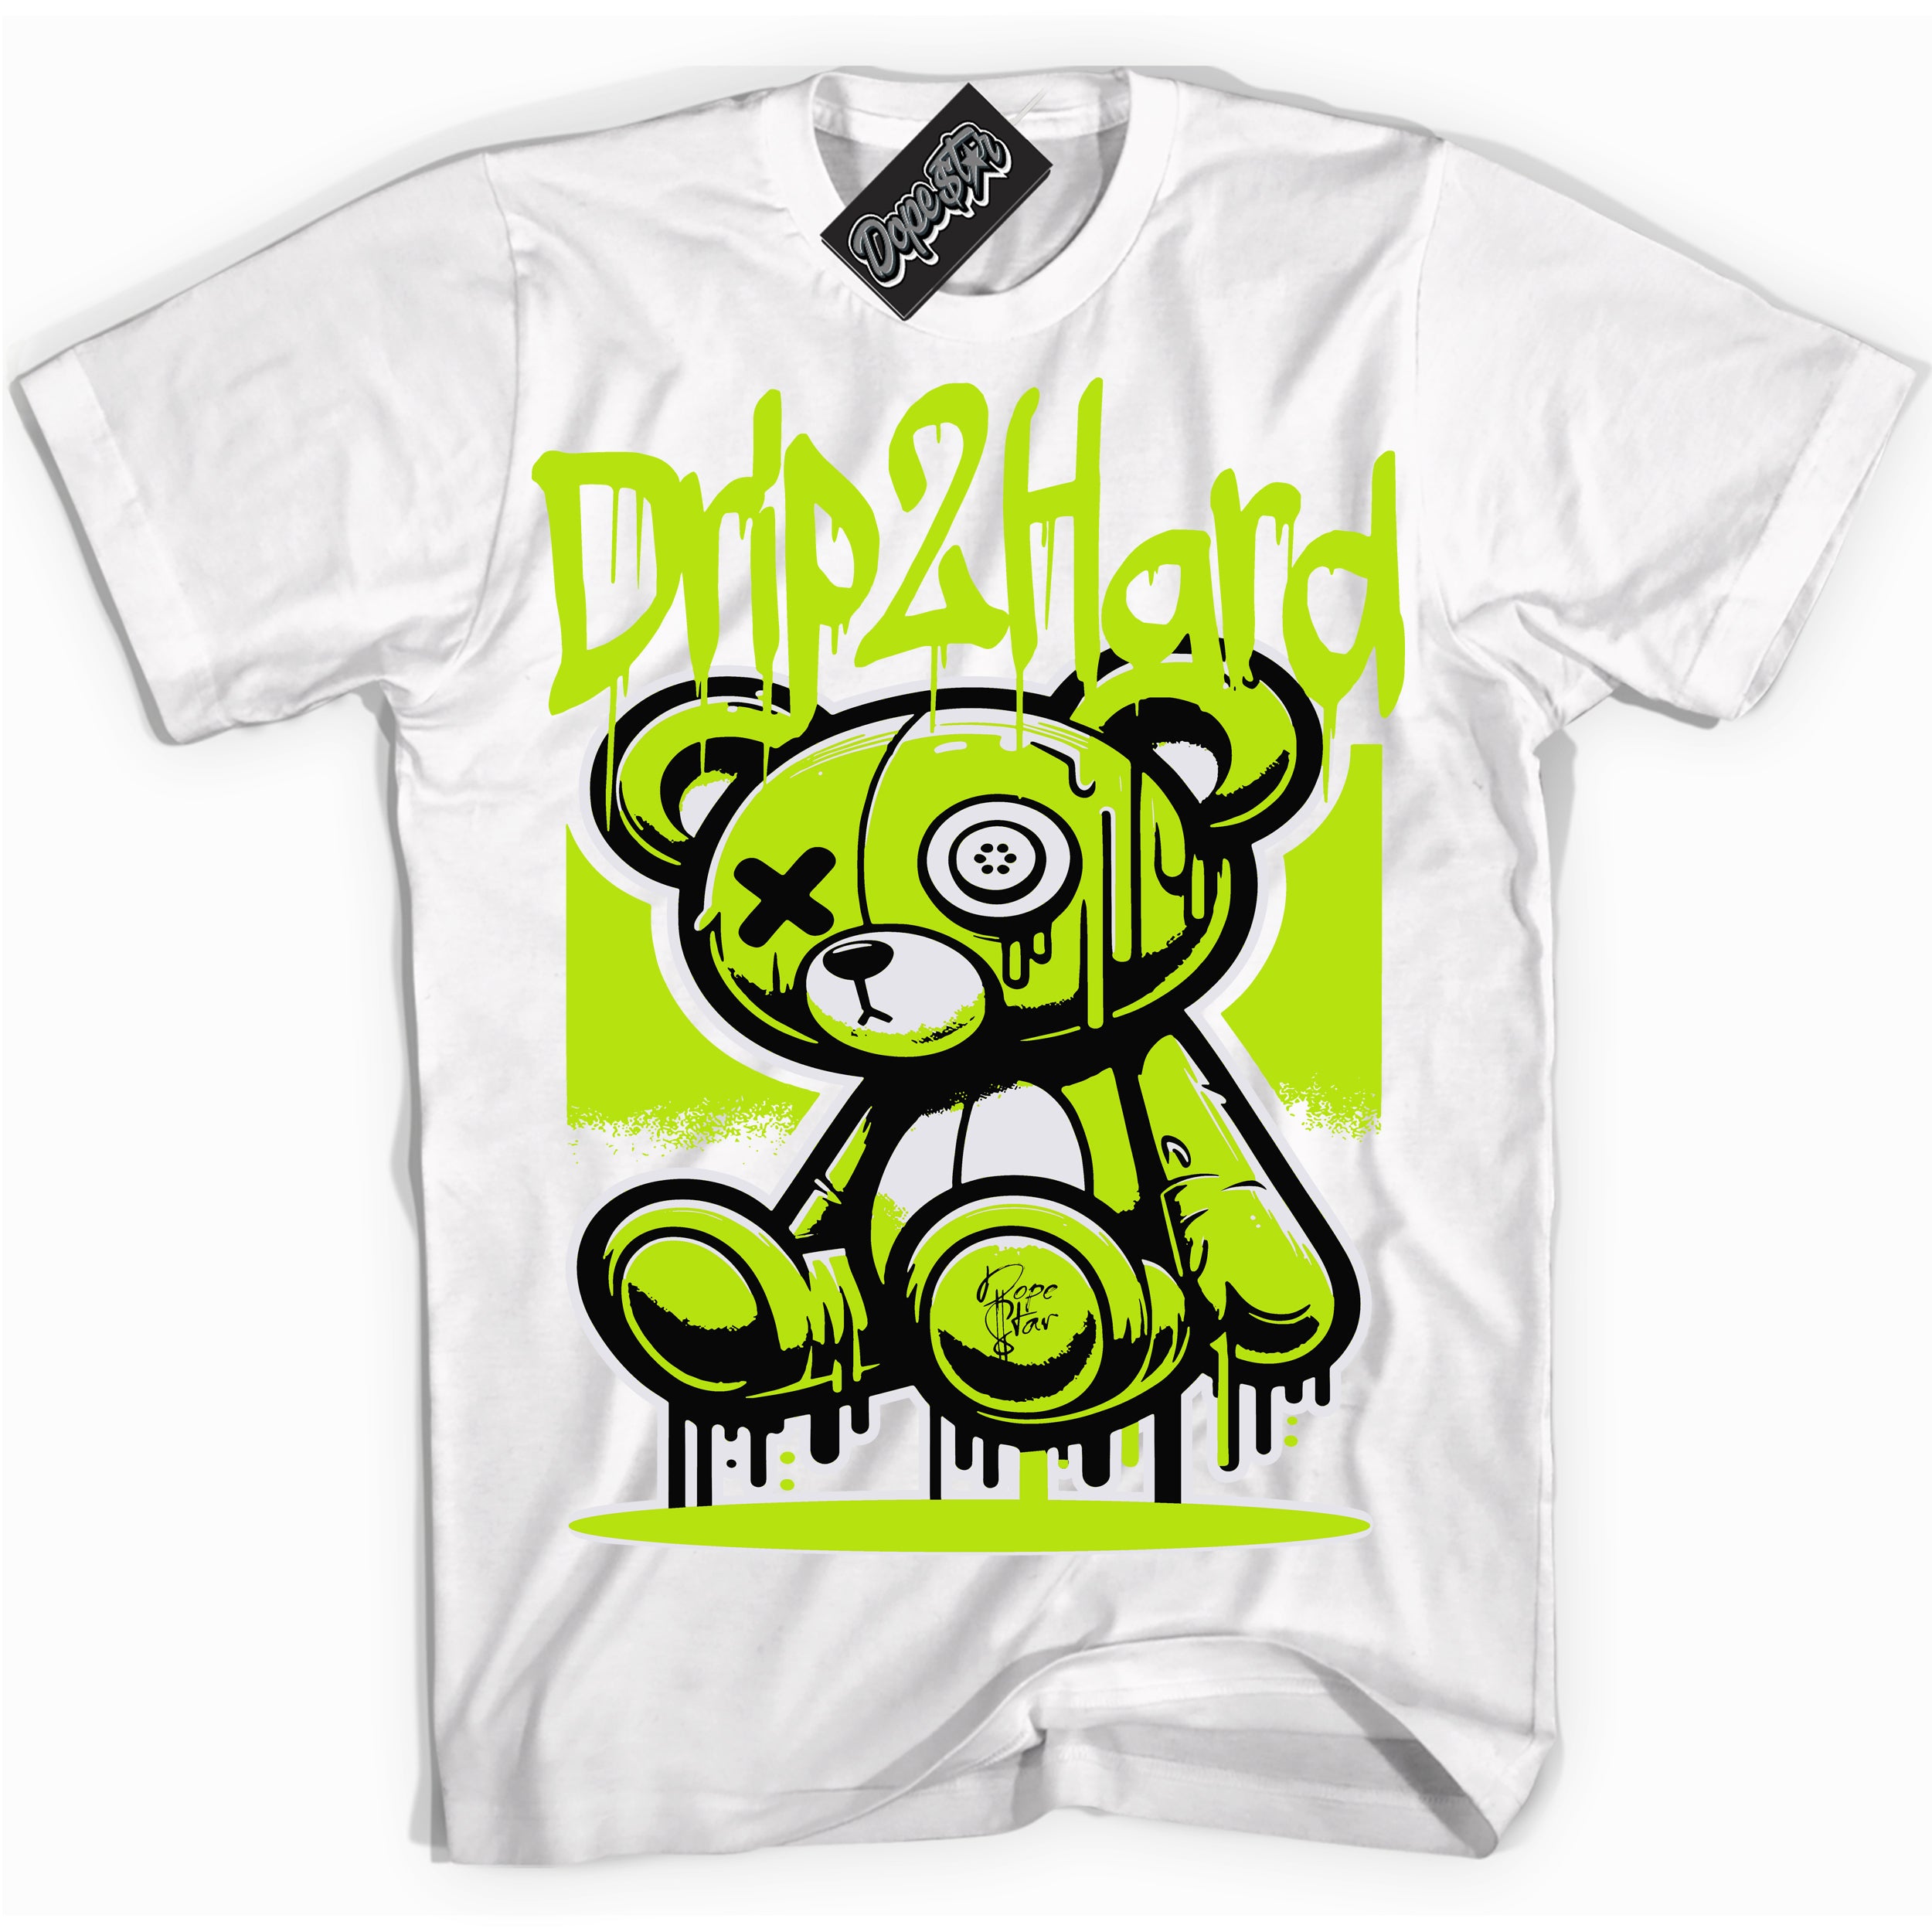 Cool White graphic tee with “ Drip 2 Hard ” design, that perfectly matches Visionaire 1s